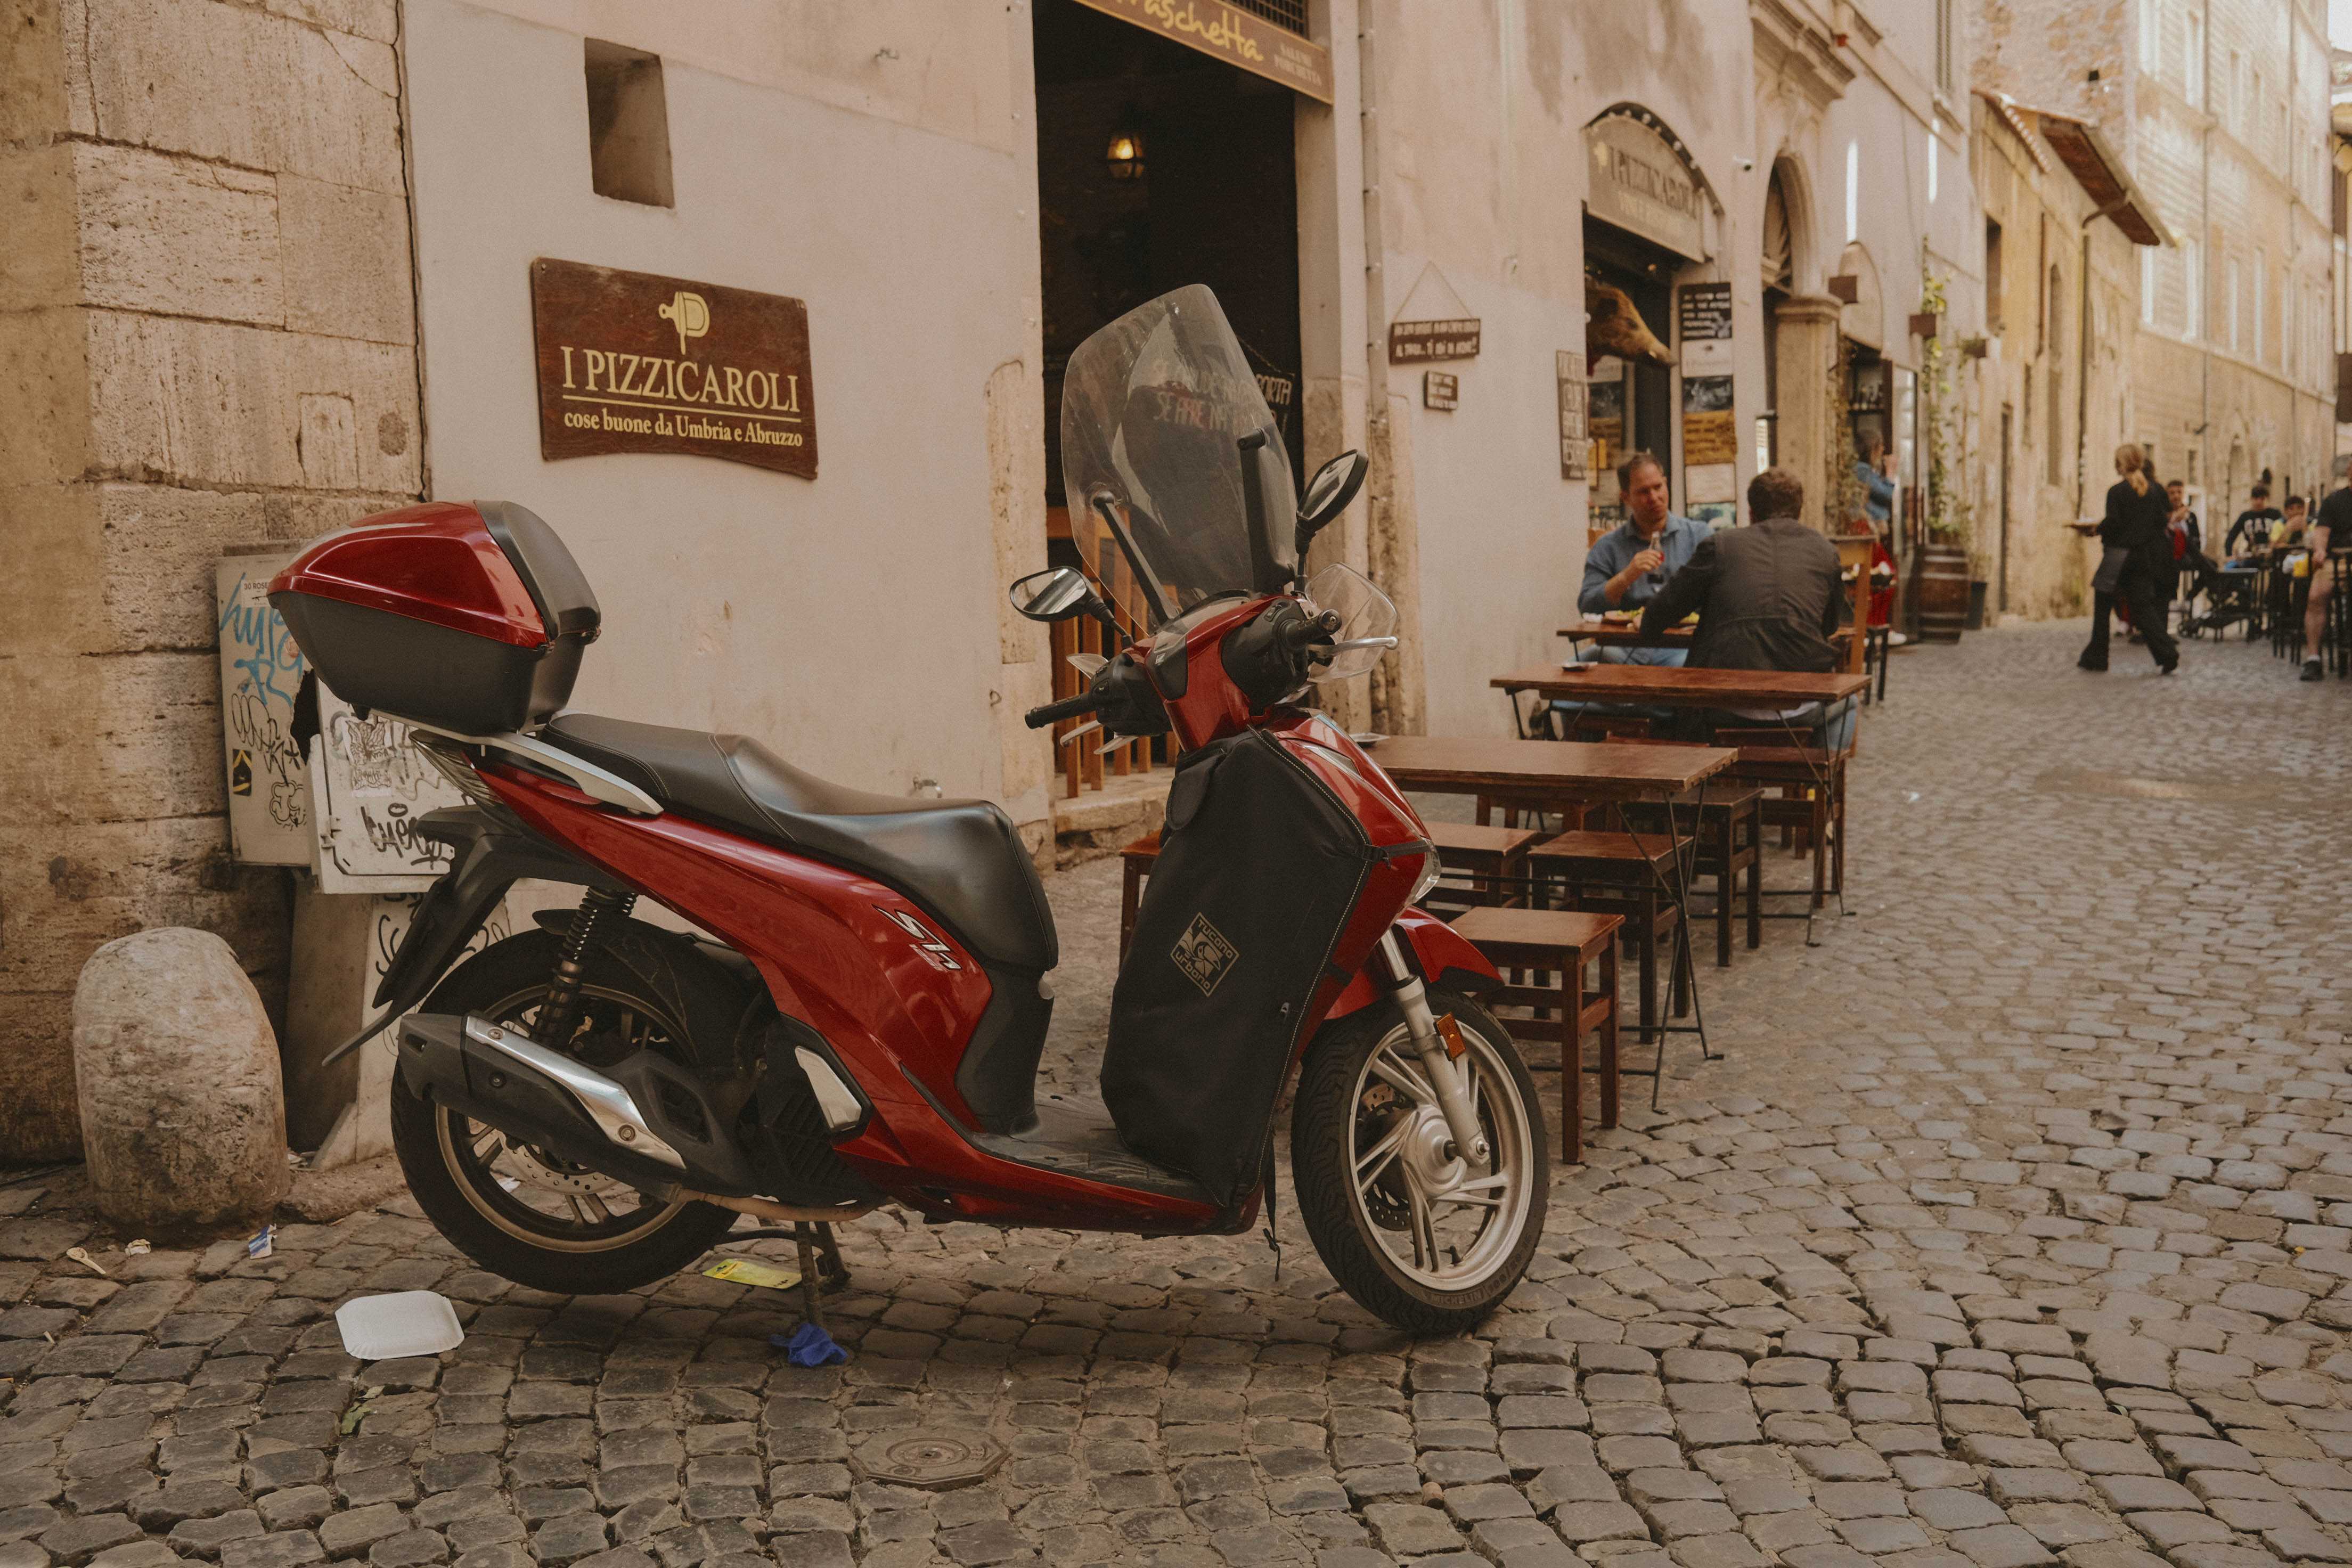 A vespa-like scooter parked on the corner near a restaurant. It's on a cobbled street with several small tables.